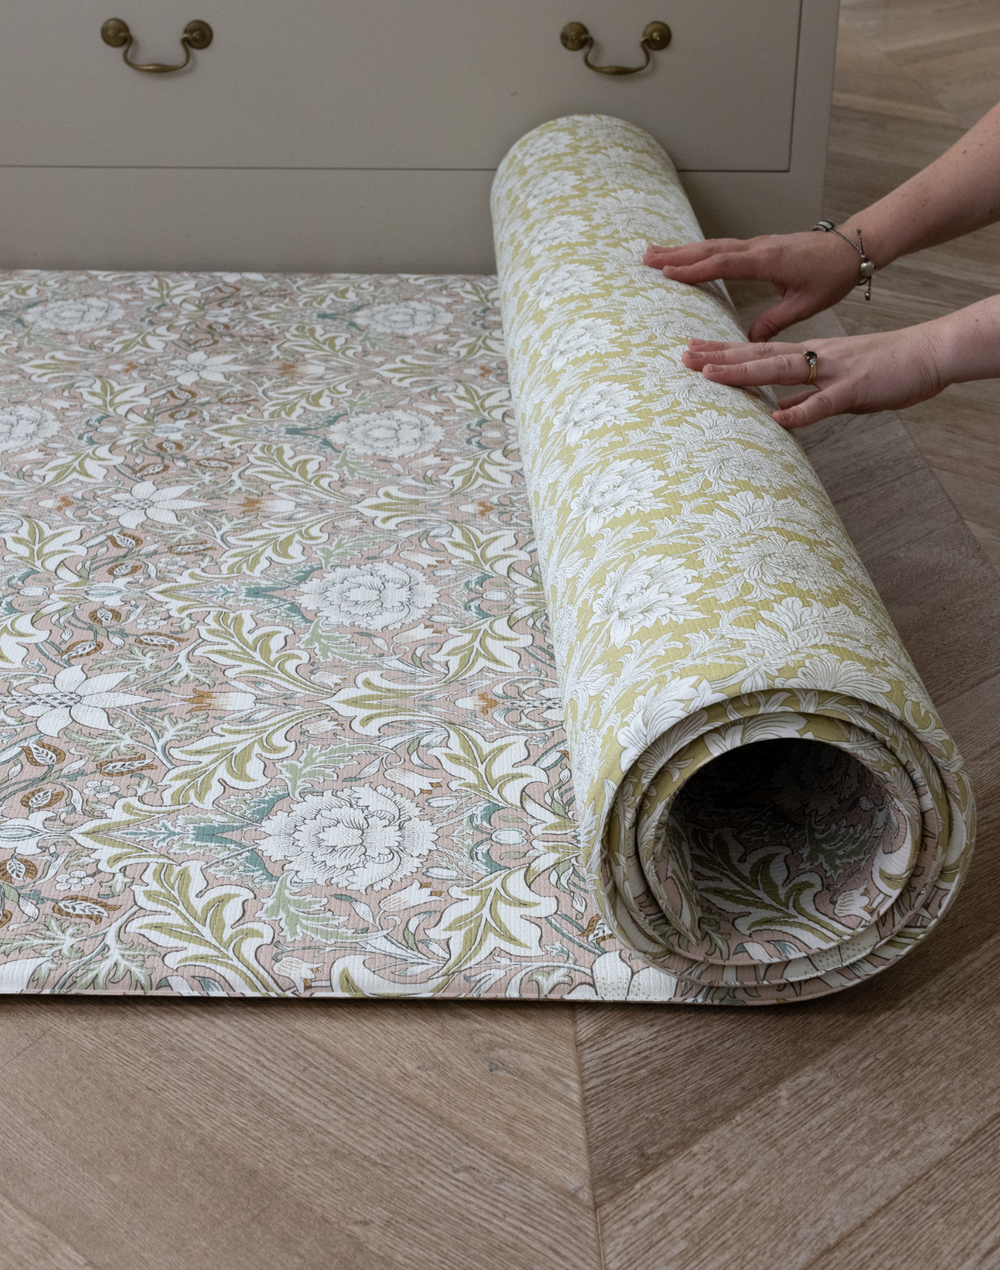 Unrolling double sided memory foam Totter and Tumble Severn play mat with Chrysanthemum design on the reverse easy to unroll and move around the home